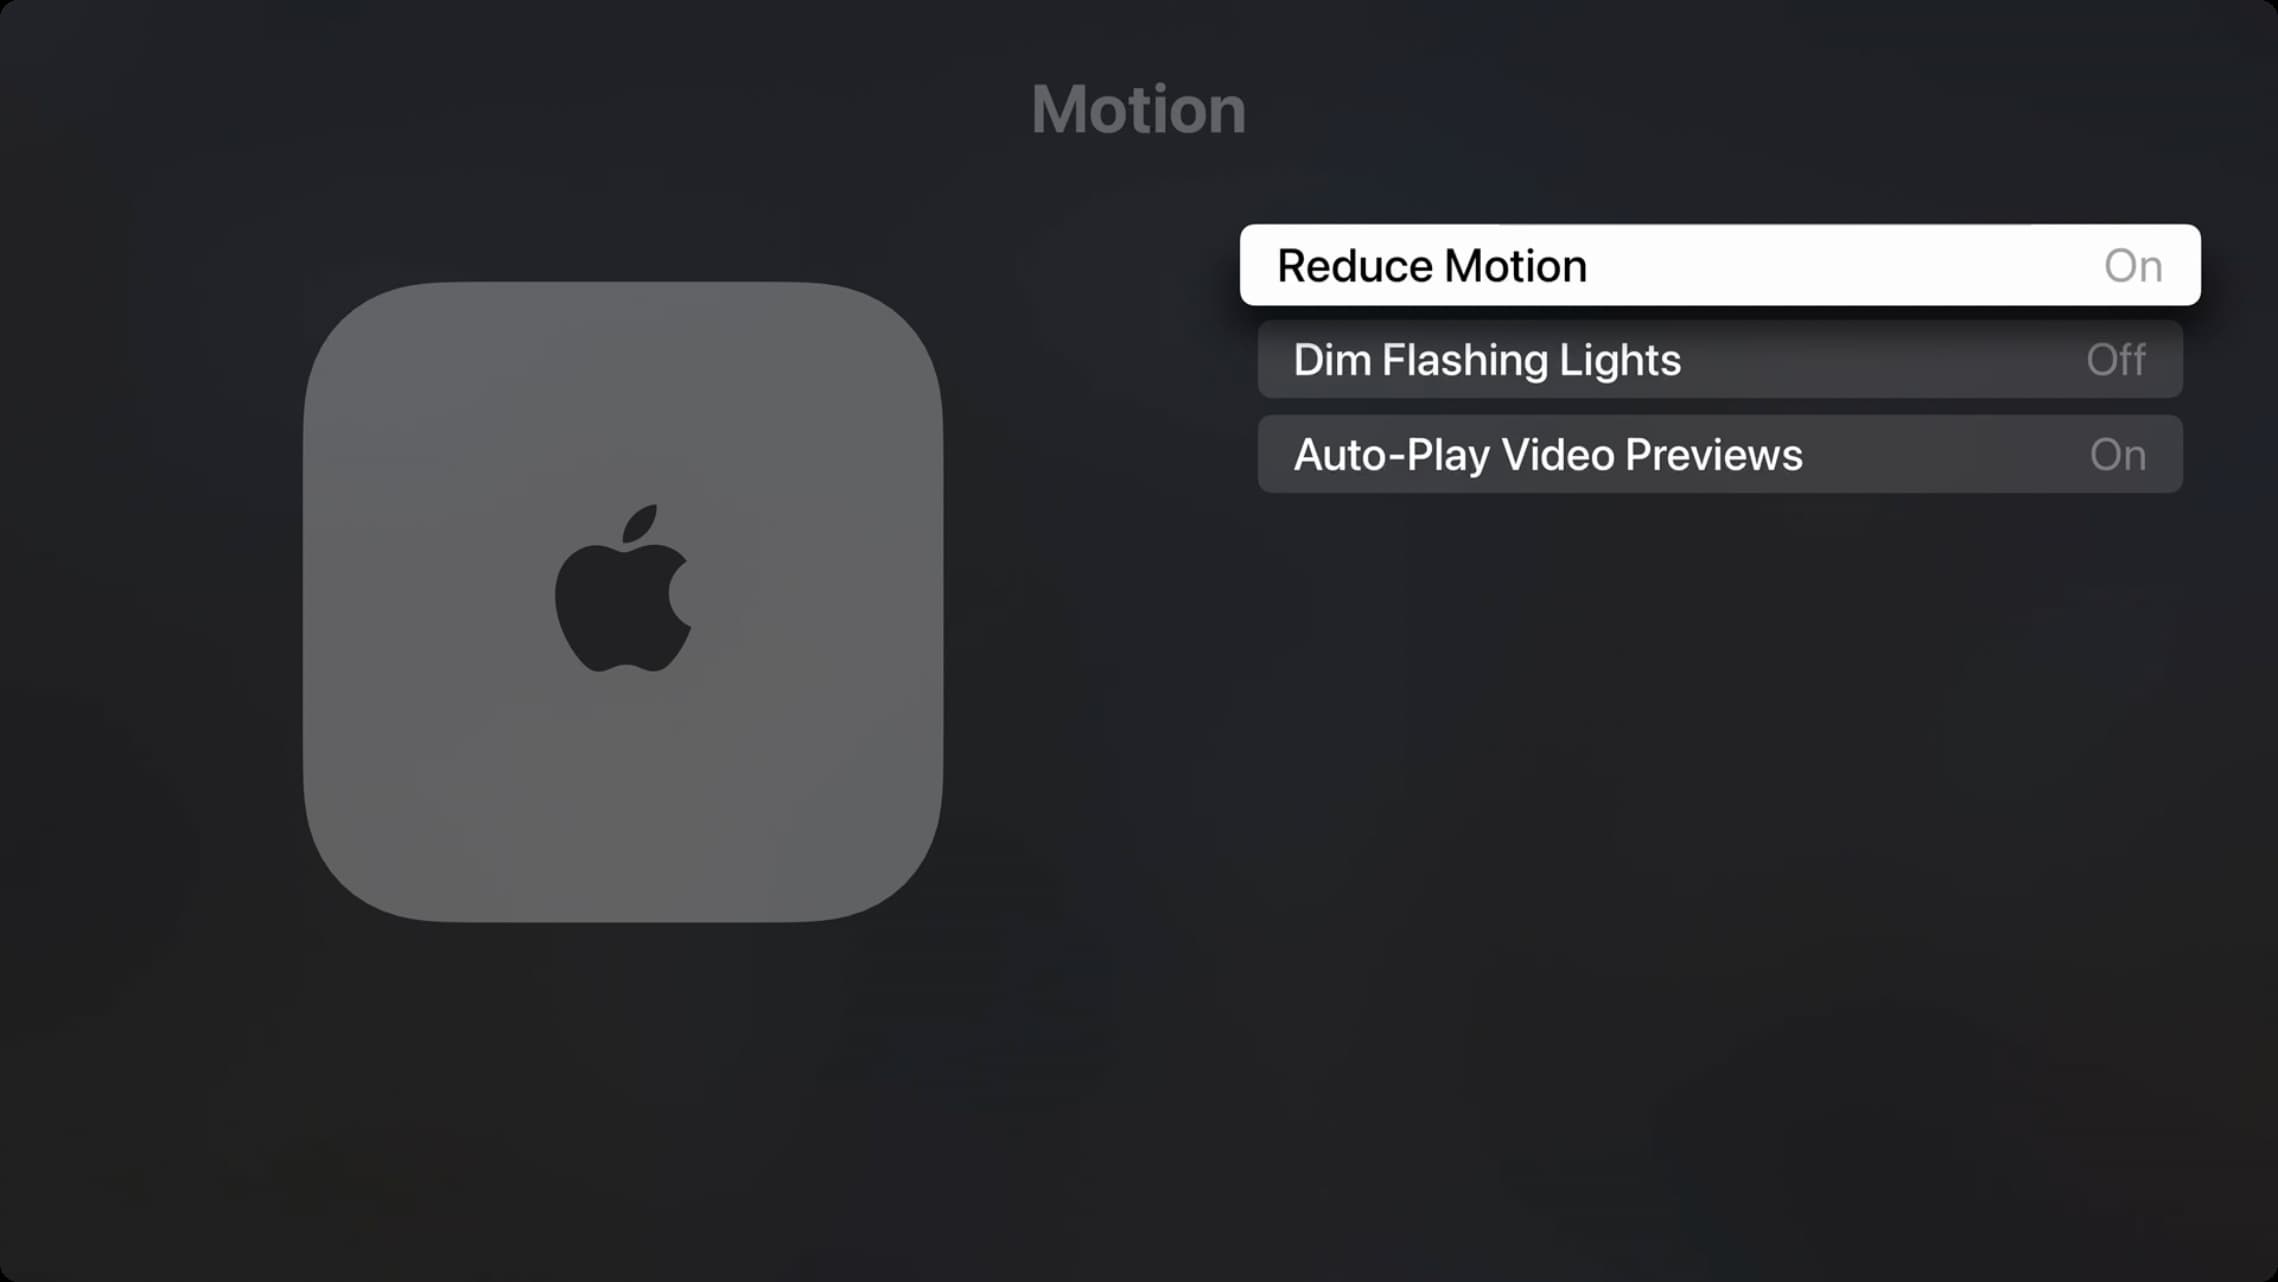 Reduce Motion switched on in Apple TV settings